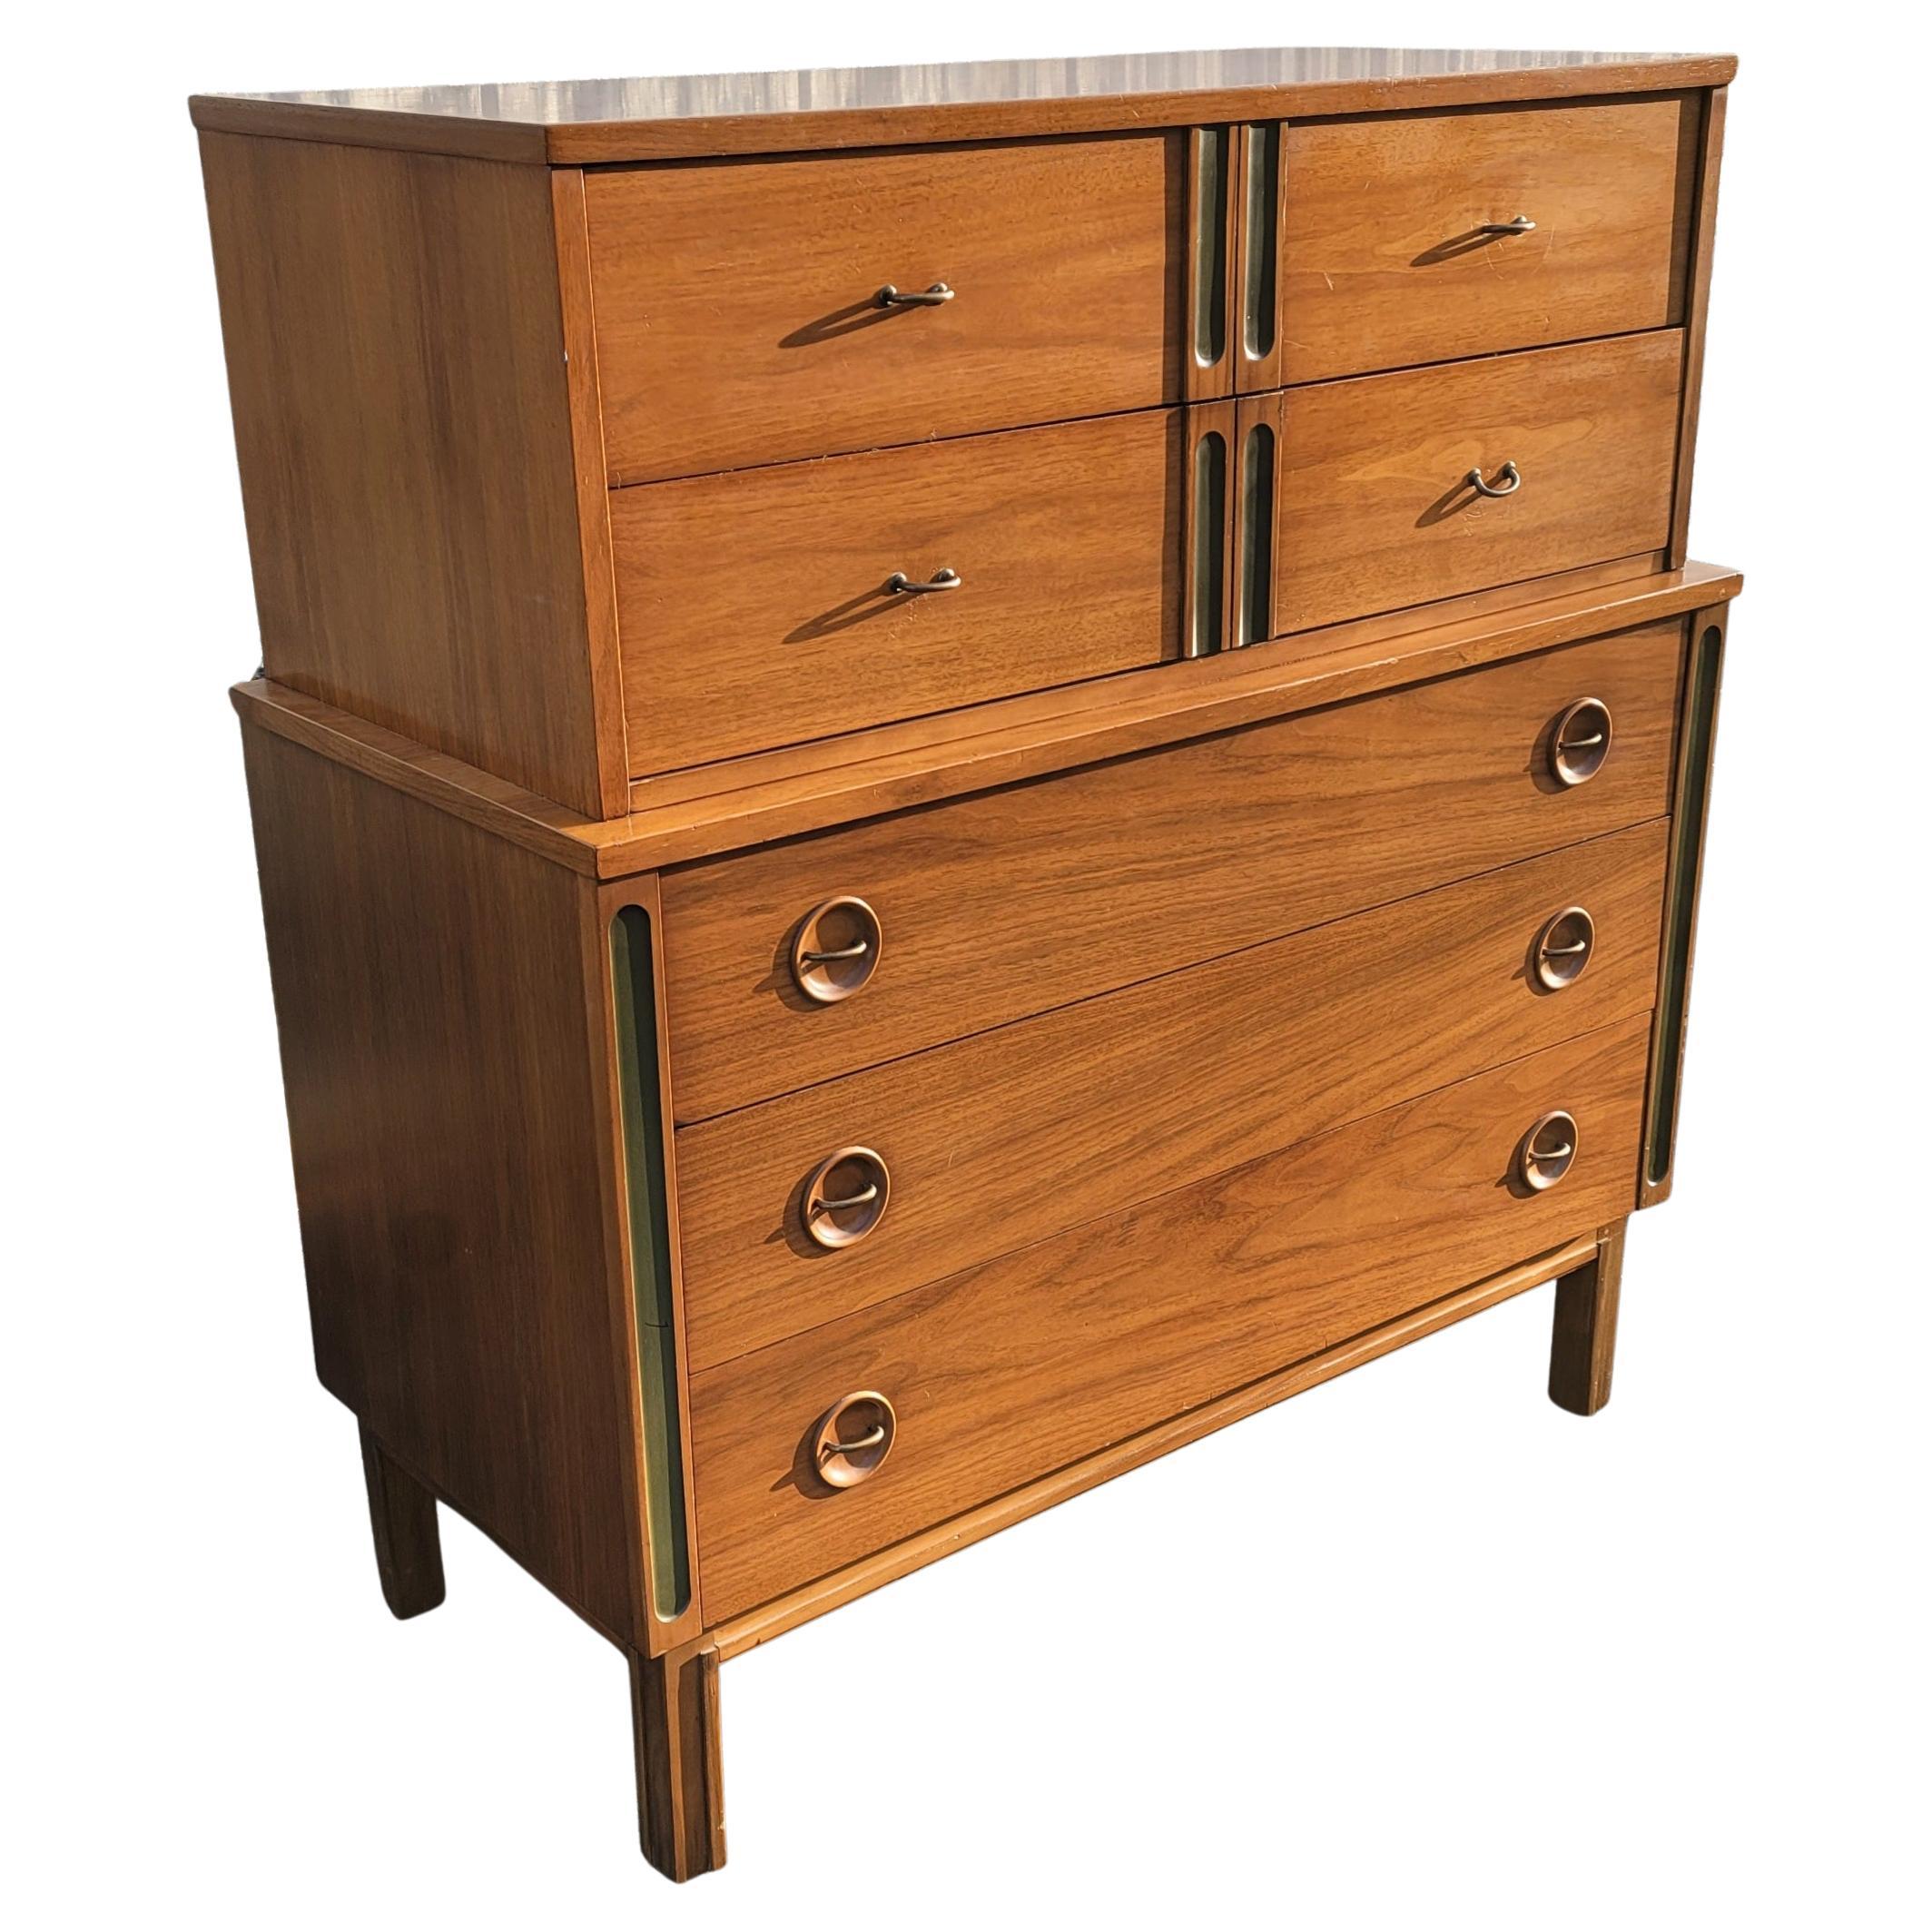 A rare danish teak chest of drawers by Arne Vodder for Sibast Mobelfabrik, 1950s. This elegant Danish Modern fine-drawer chest on chest of drawers is in very good vintage condition. Would look great in any Mid-Century Modern home or apartment. Very